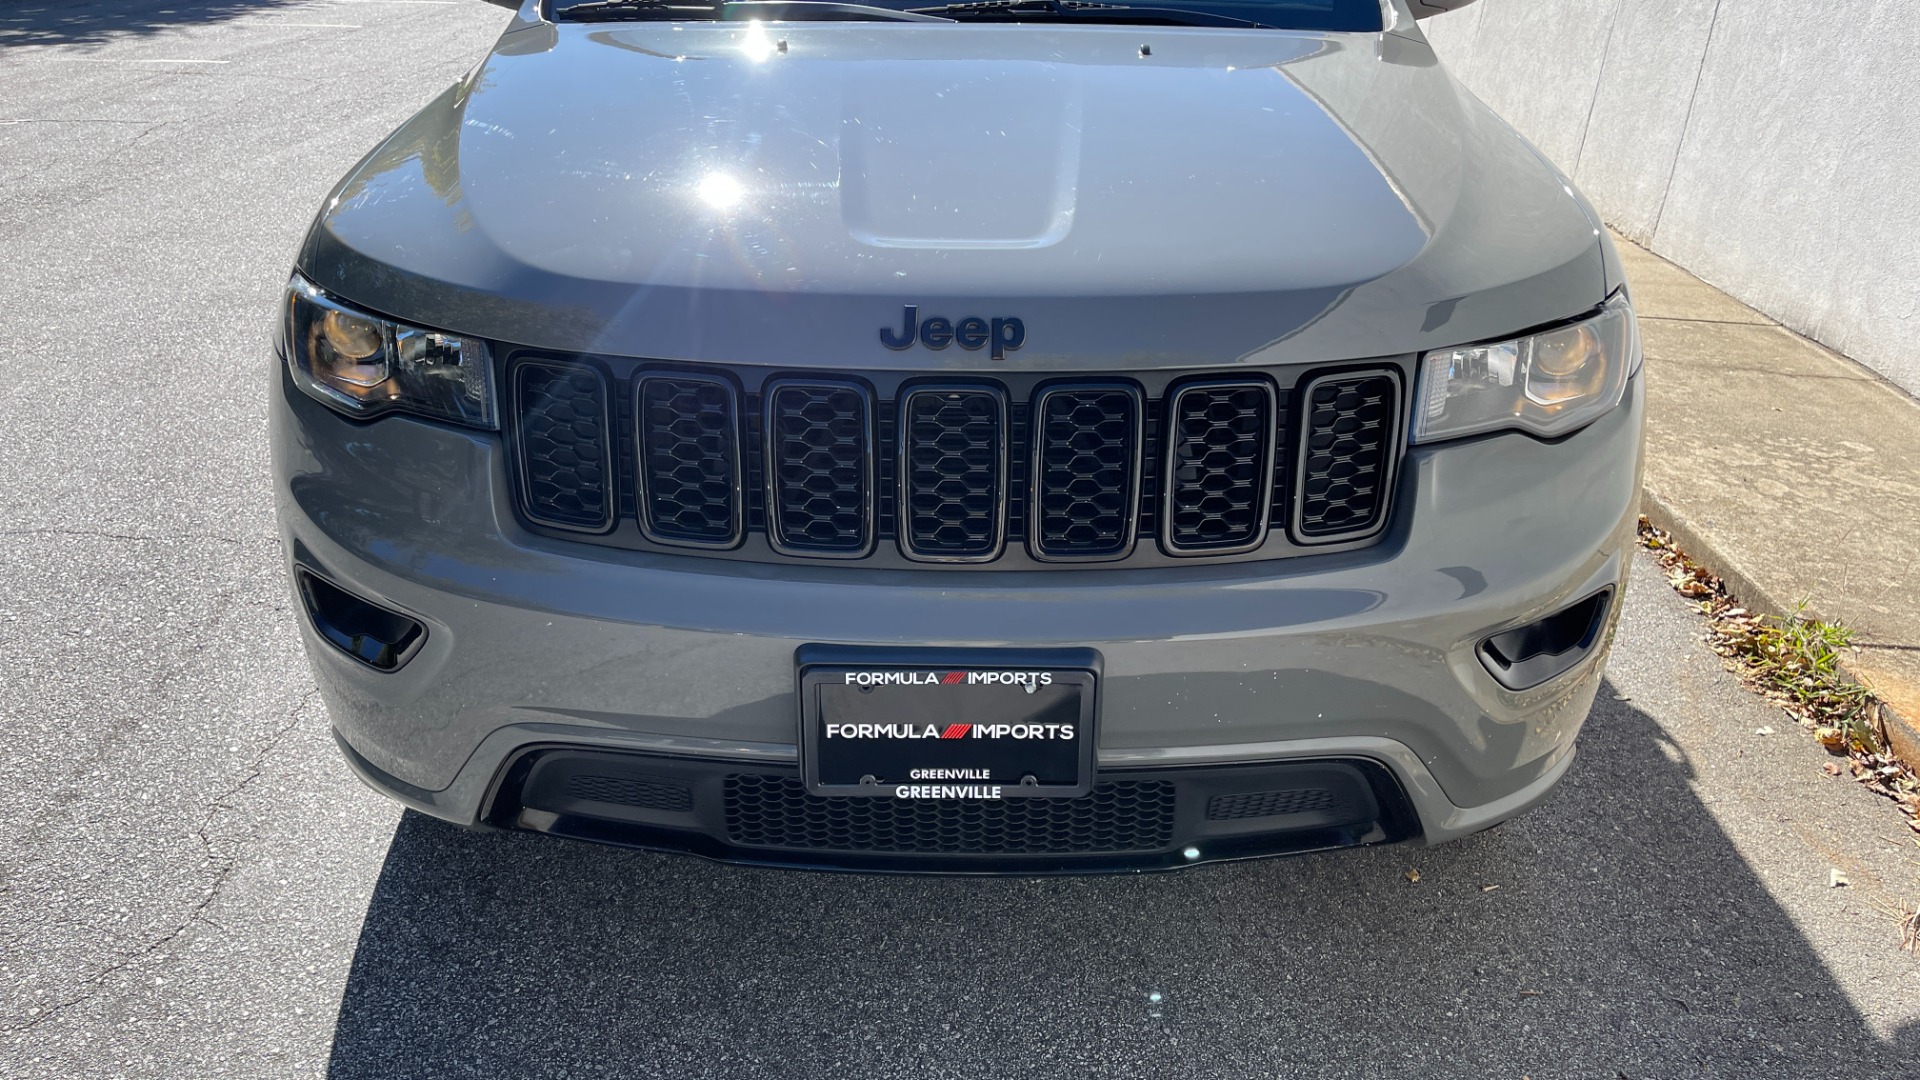 Used 2019 Jeep Grand Cherokee ALTITUDE / BLACK 20IN WHEELS / BLACK TRIM / SUNROOF / HEATED SEATS for sale $34,495 at Formula Imports in Charlotte NC 28227 9